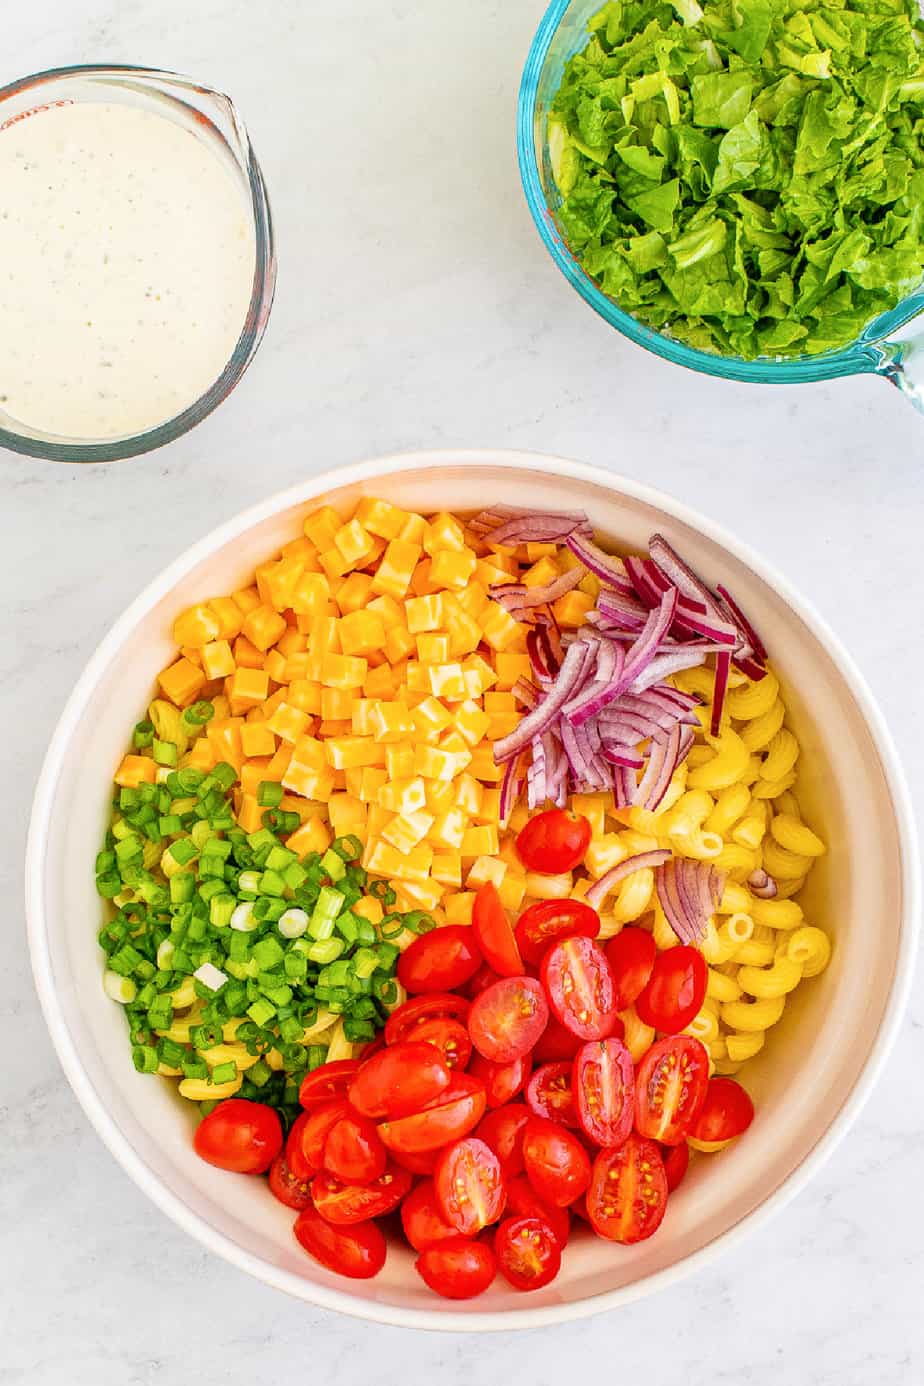 Chopped vegetables, cheese and cooked pasta in a bowl separated from overhead with a glass container of ranch and a bowl of chopped lettuce from overhead on the counter.